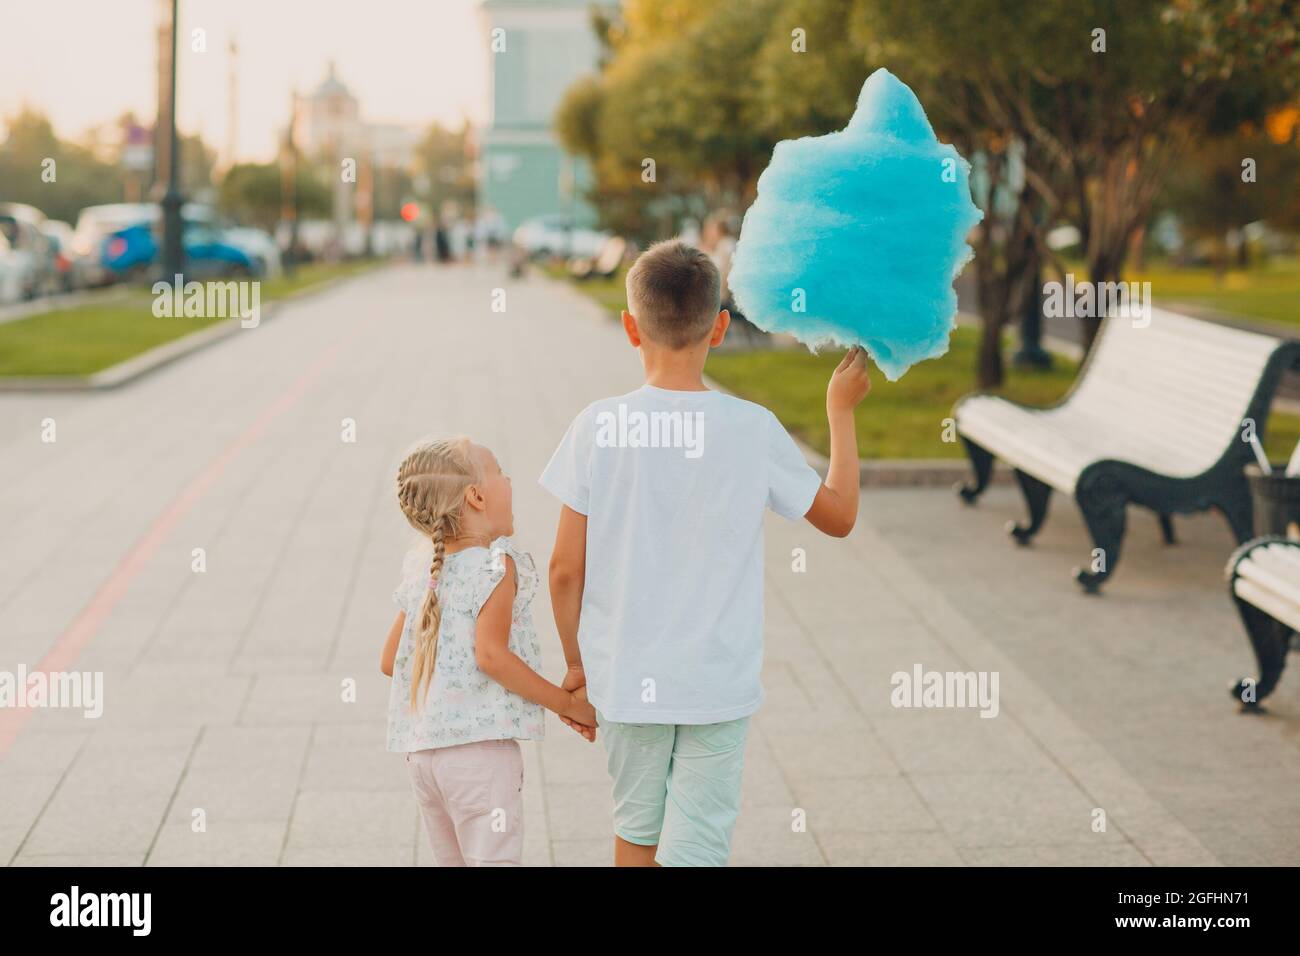 Happy children boy and girl eating blue cotton candy outdoors. Stock Photo